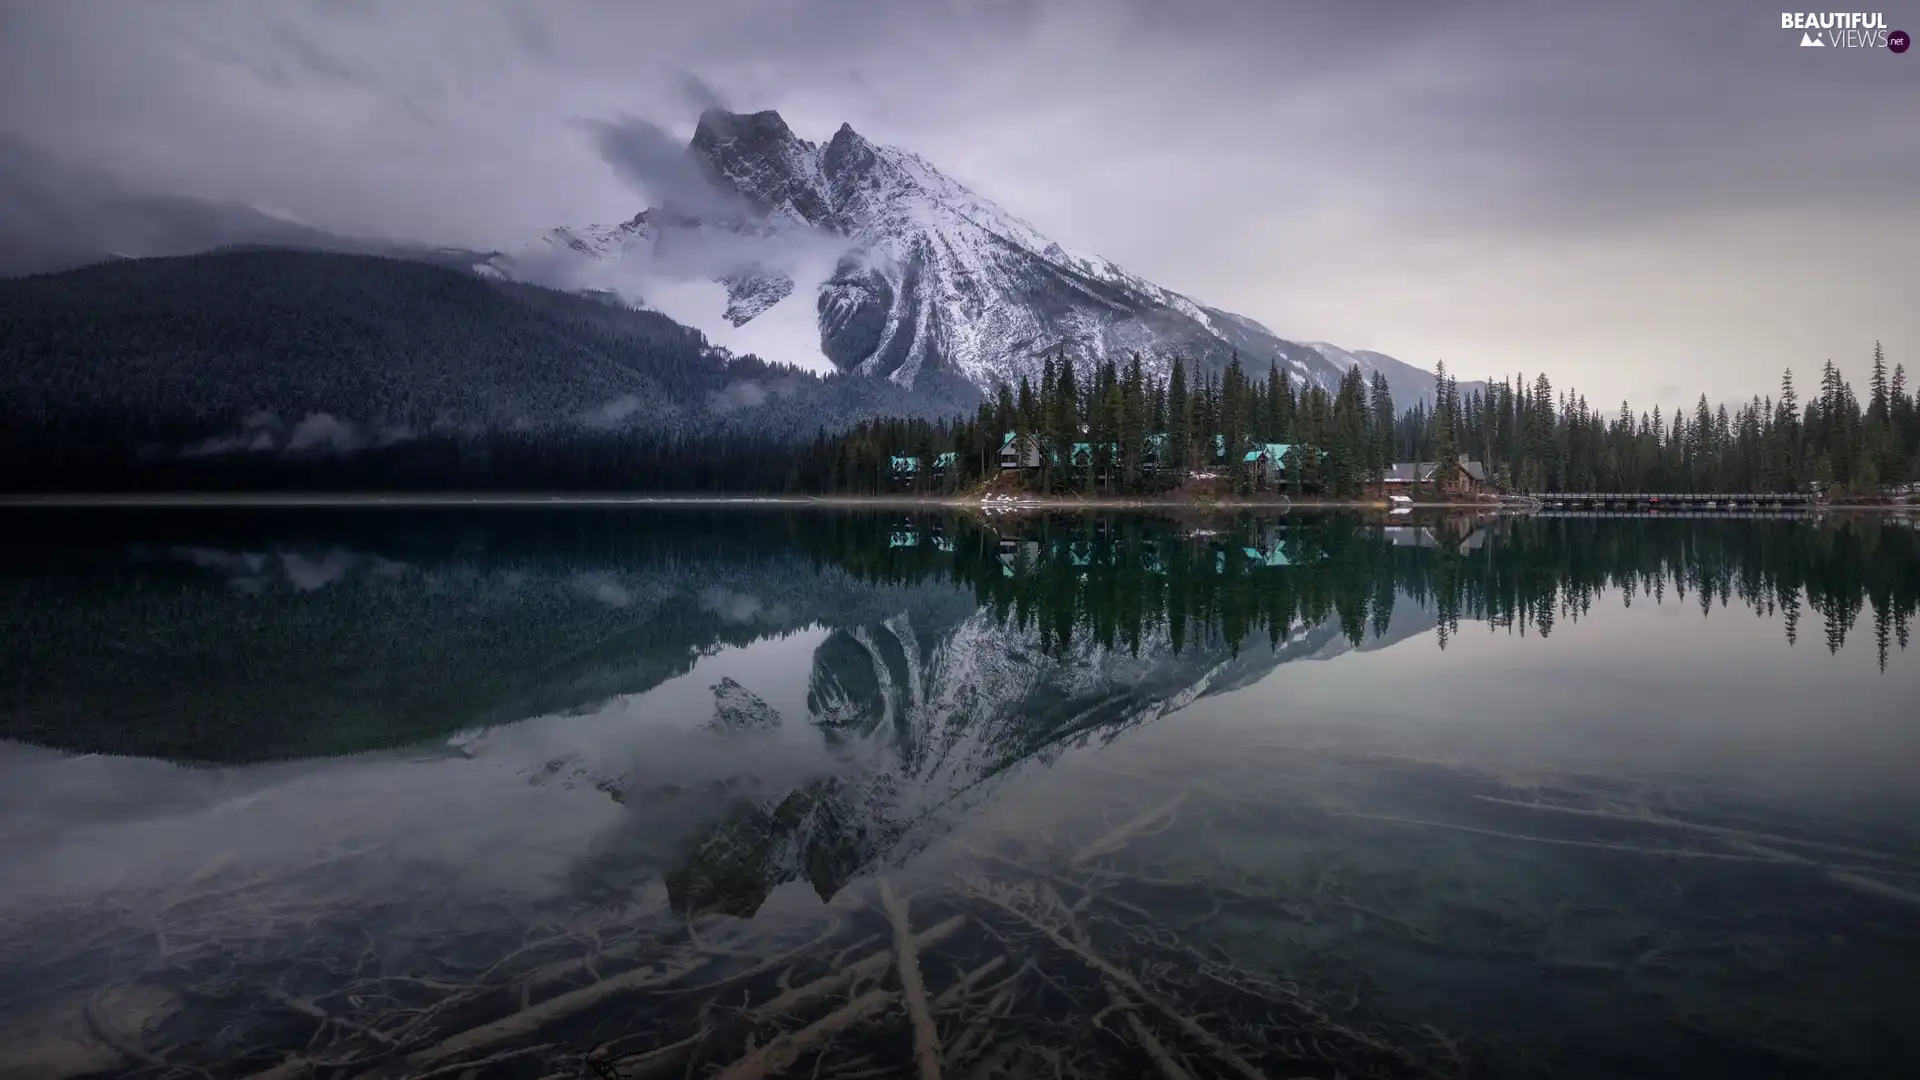 Emerald Lake, Yoho National Park, house, bridge, Province of British Columbia, Canada, forest, clouds, Mountains